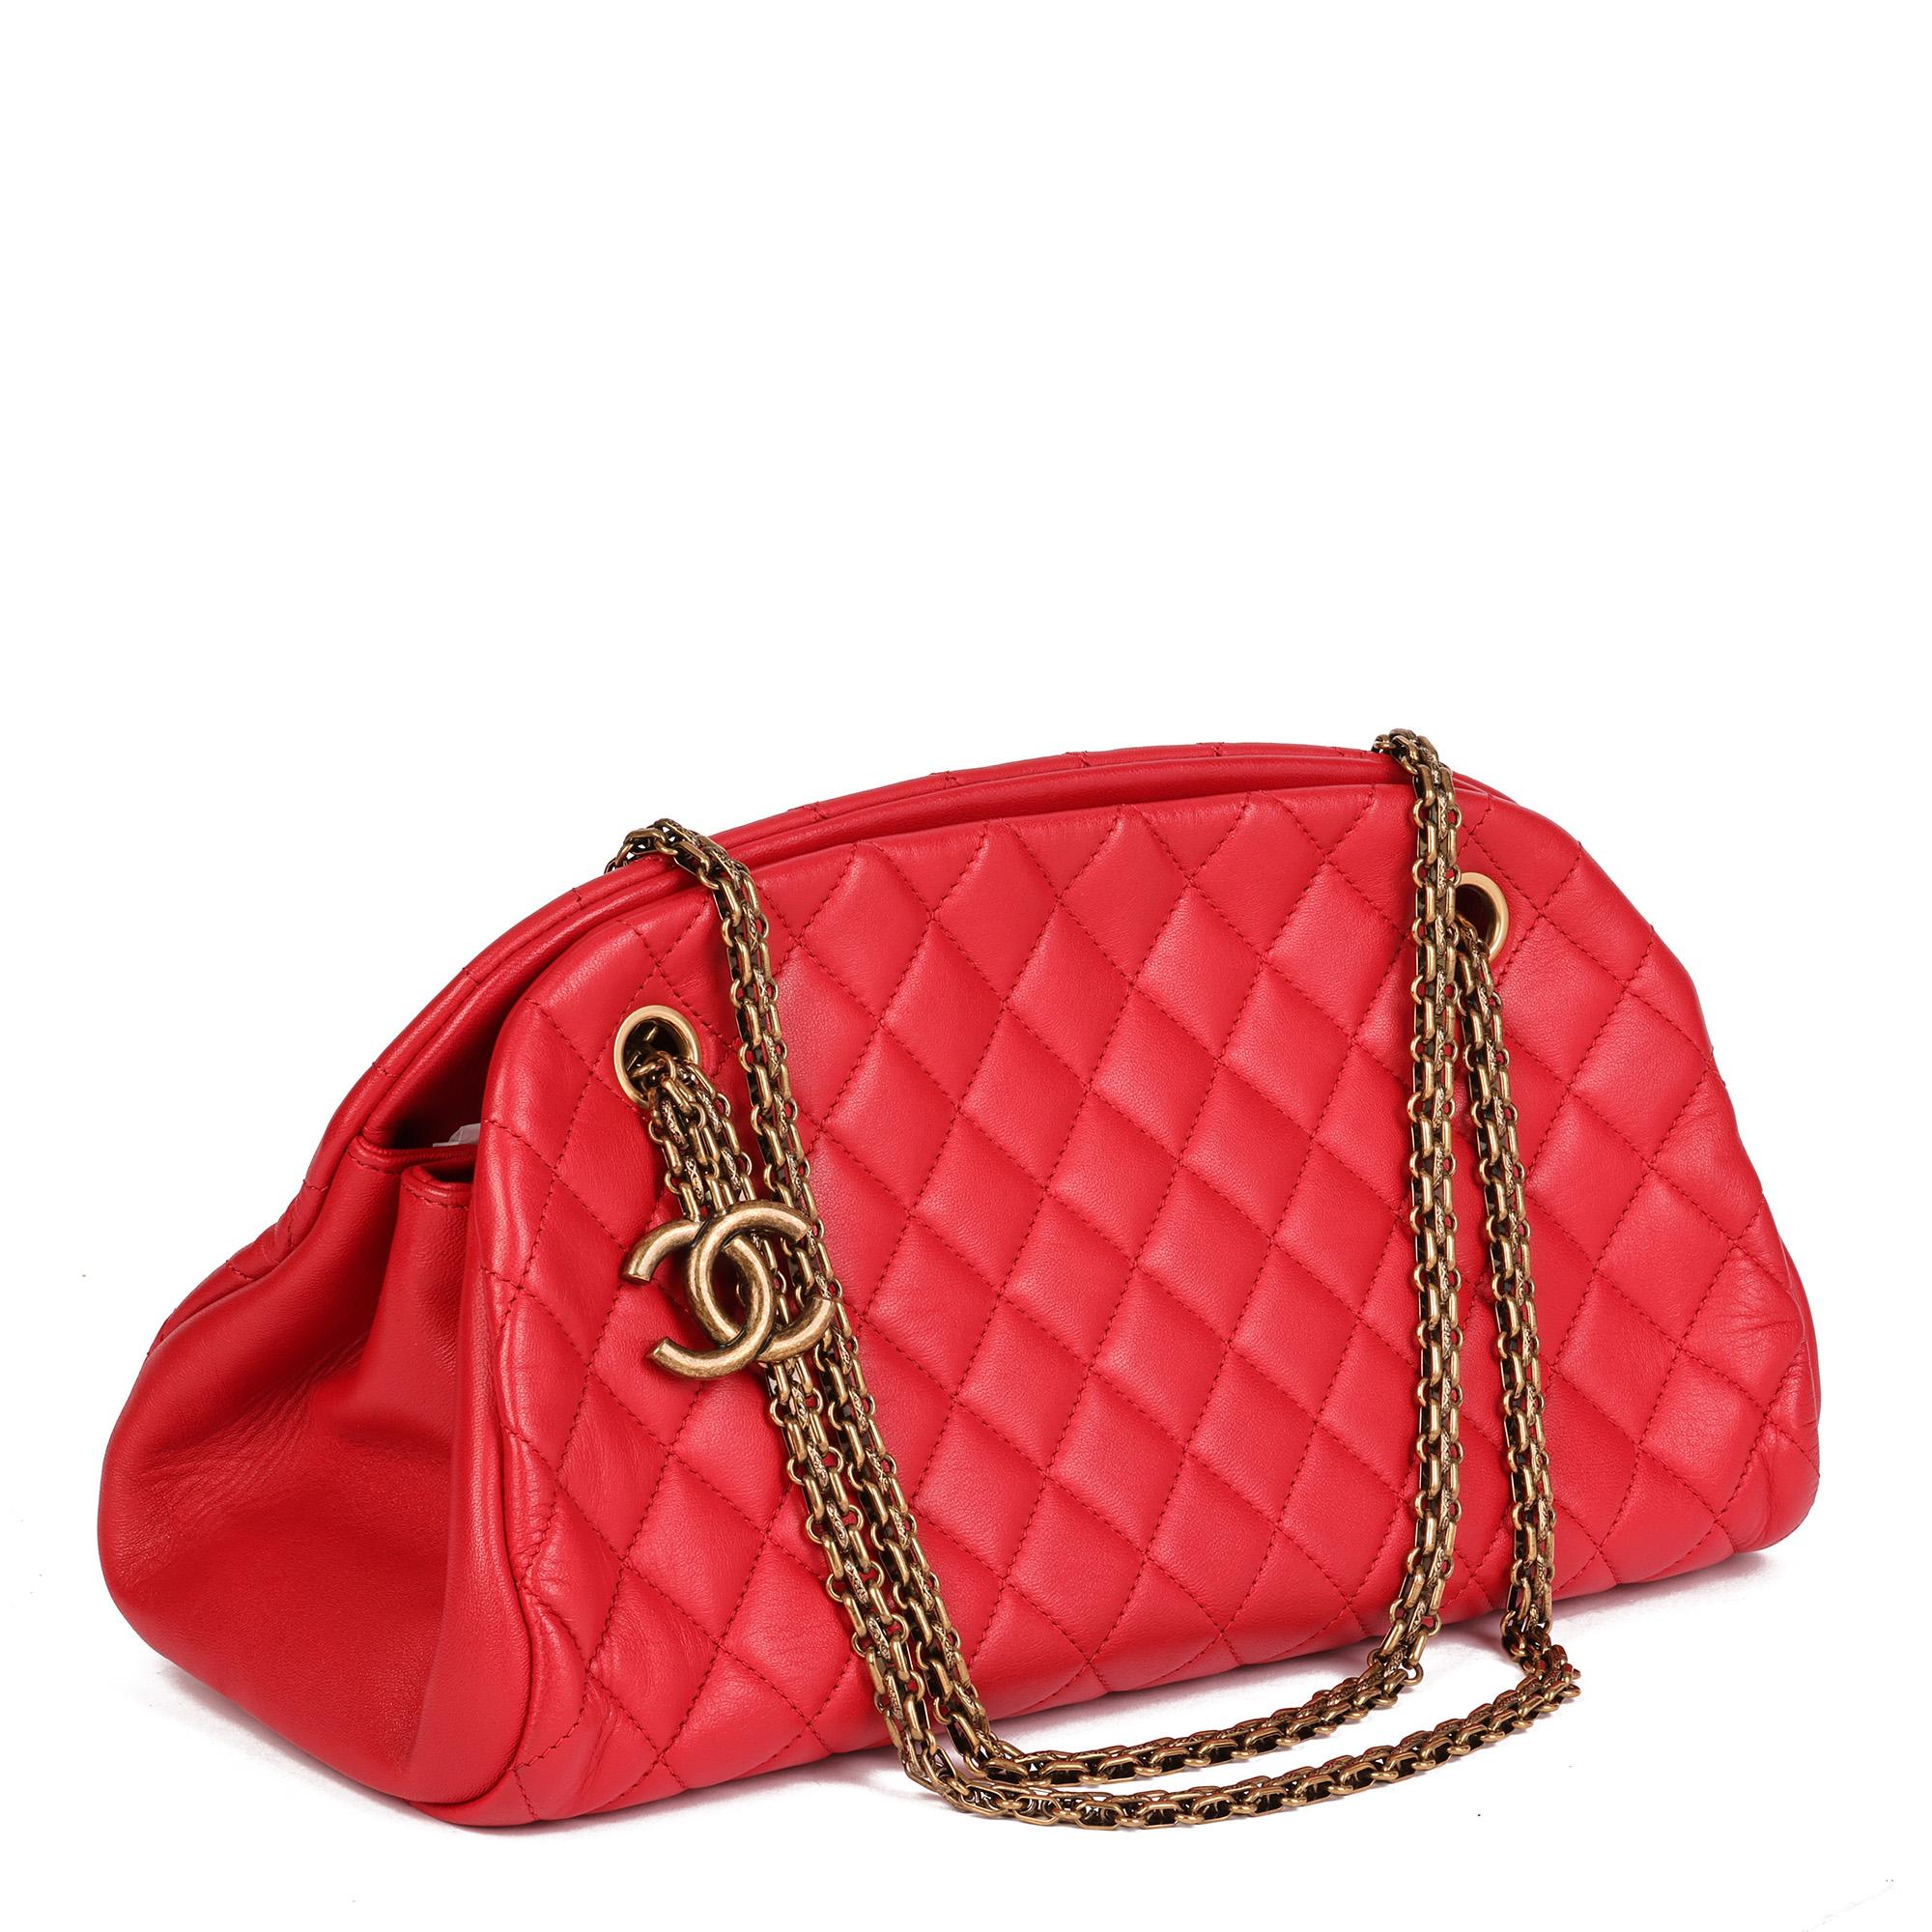 CHANEL
Red Quilted Lambskin Just Mademoiselle Bowling Bag

Xupes Reference: HB4624
Serial Number: 14157037
Age (Circa): 2011
Accompanied By: Chanel Dust Bag, Box, Authenticity Card, Care Booklet, Invoice
Authenticity Details: Authenticity Card,